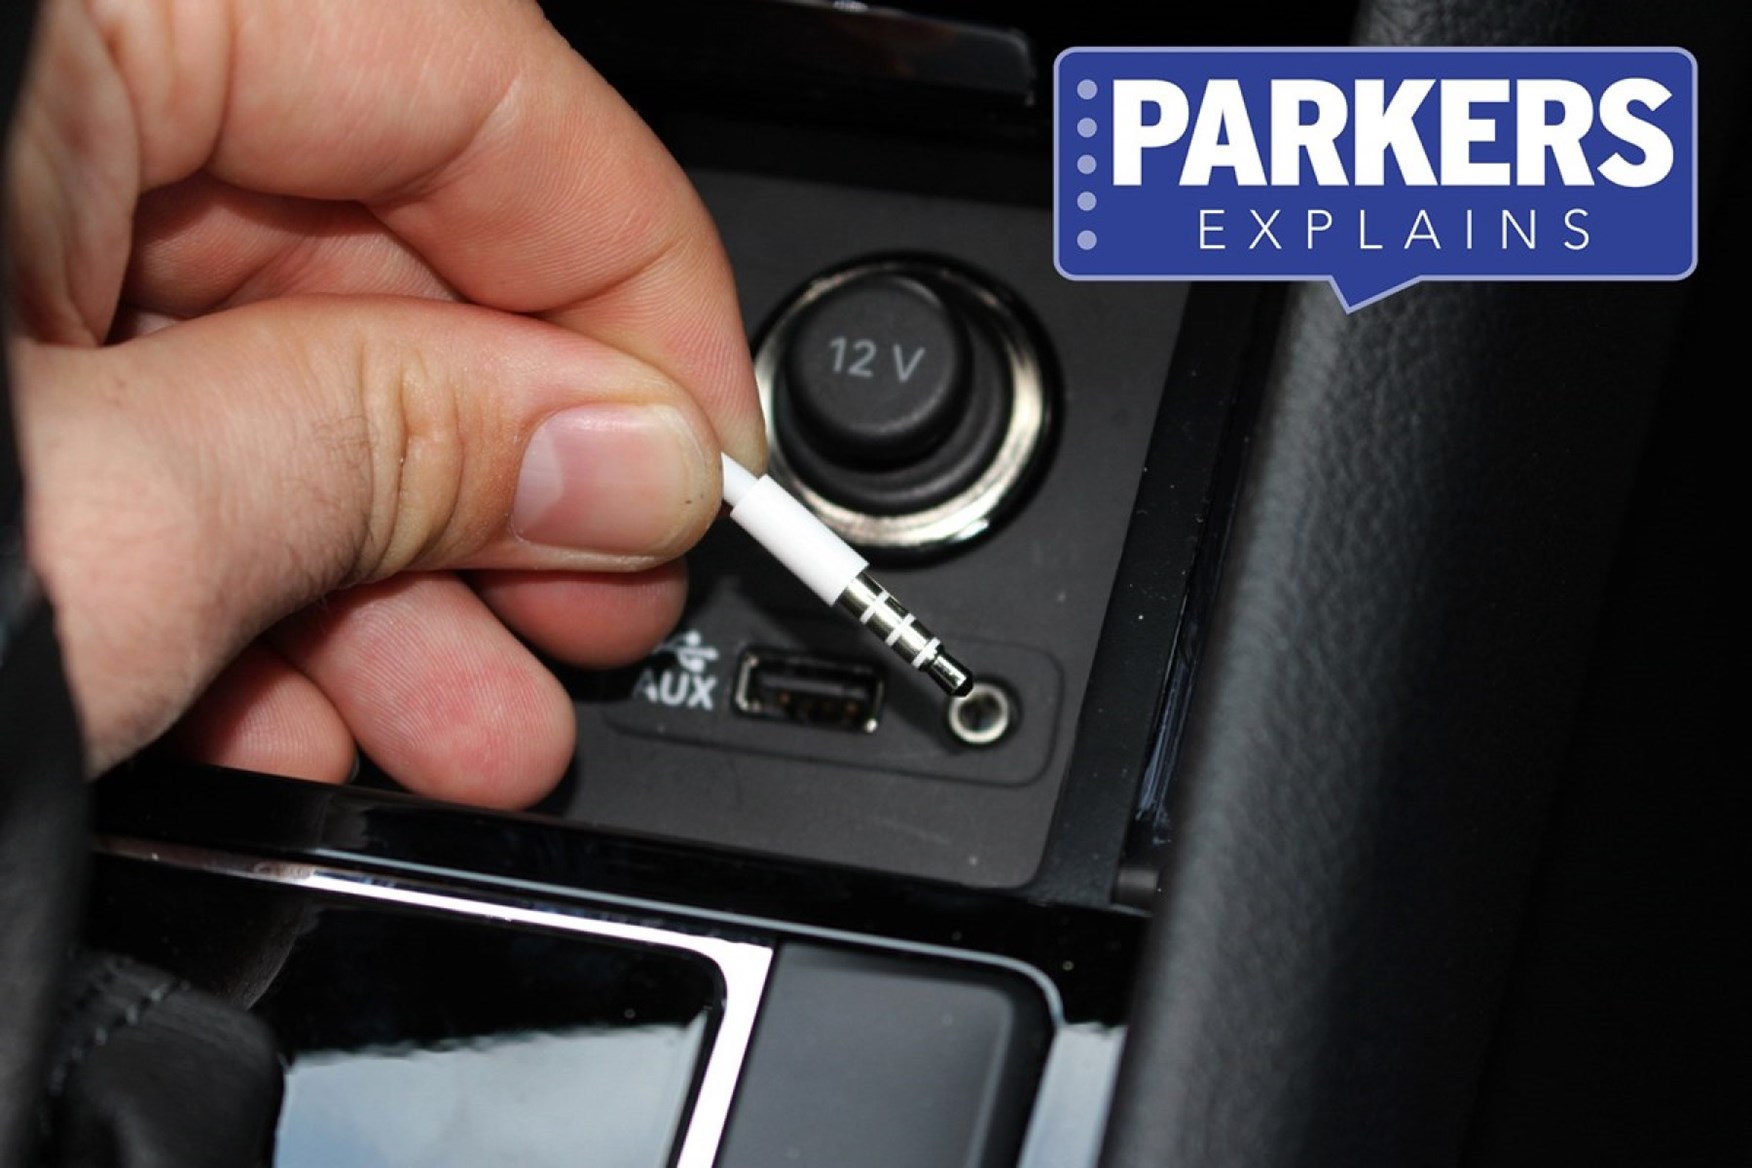 https://parkers-images.bauersecure.com/wp-images/17123/050-aux-in-jack-what-is-aux-in.jpg